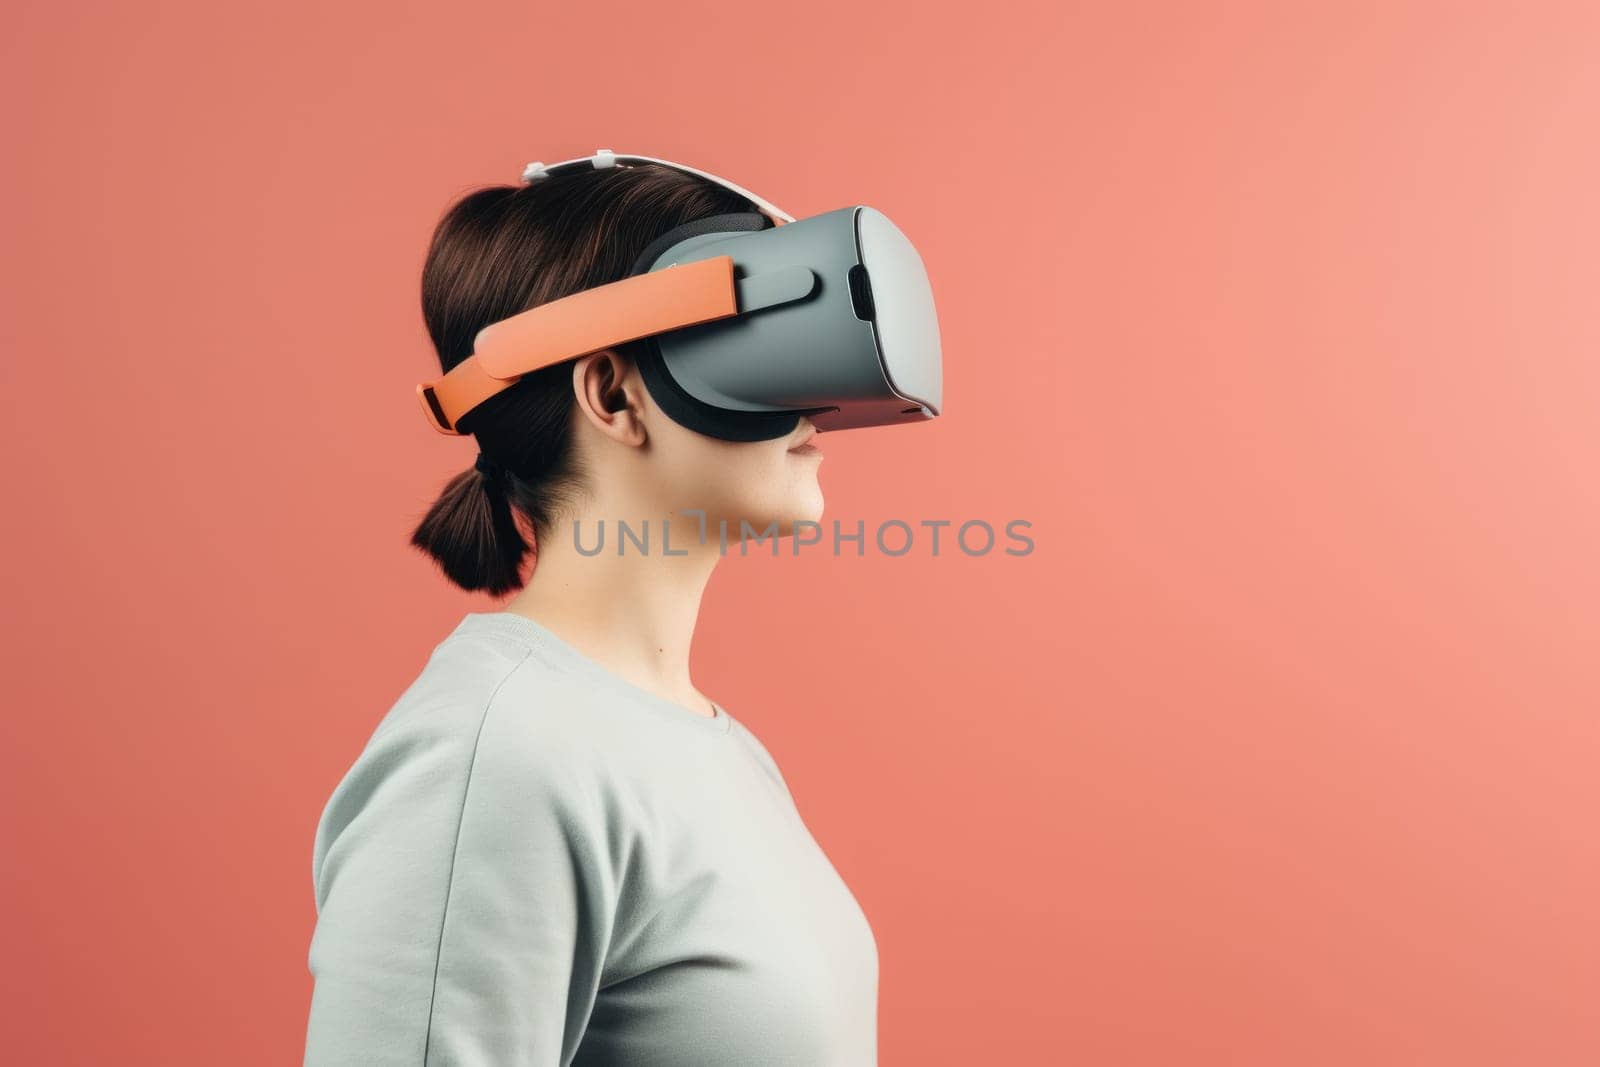 A woman wearing a virtual reality headset against a pink background